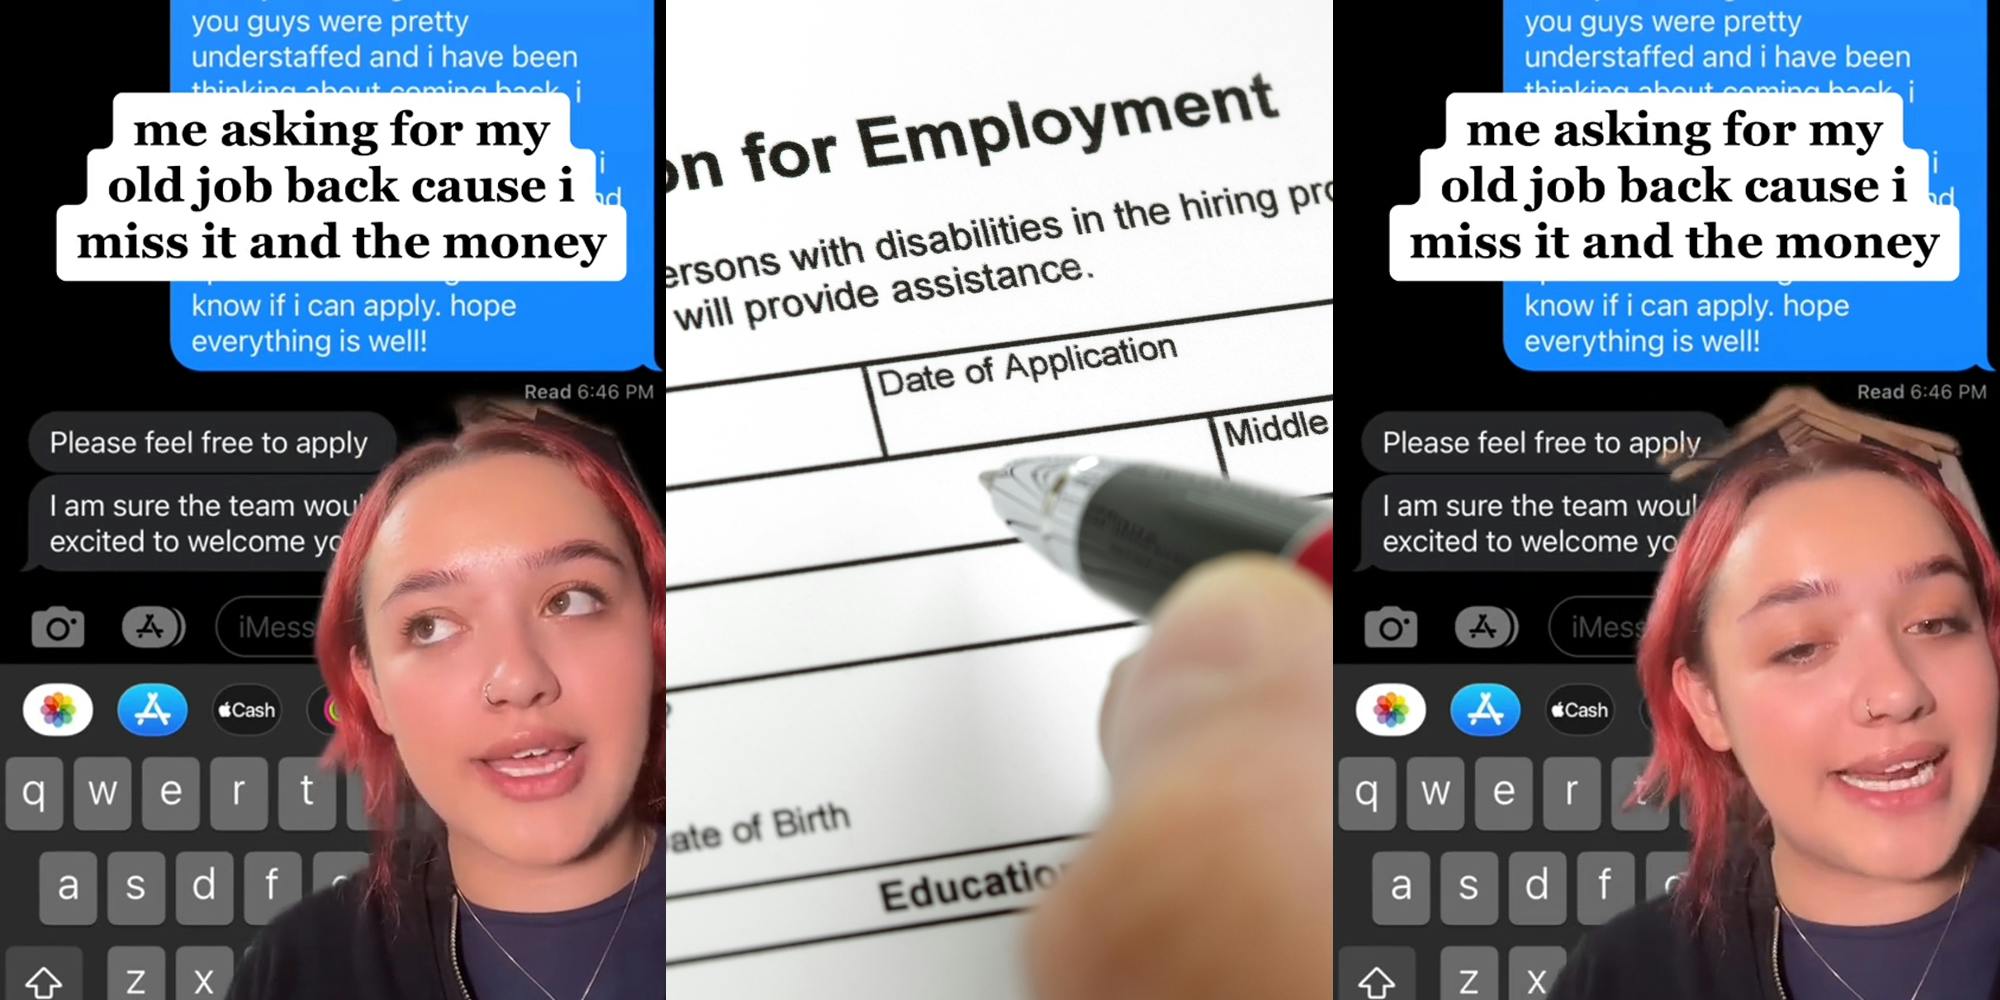 worker greenscreen TikTok over text messages with caption "me asking for my old job back cause i miss it and need the money" (l) person holding pen over employment application (c) worker greenscreen TikTok over text messages with caption "me asking for my old job back cause i miss it and need the money" (r)